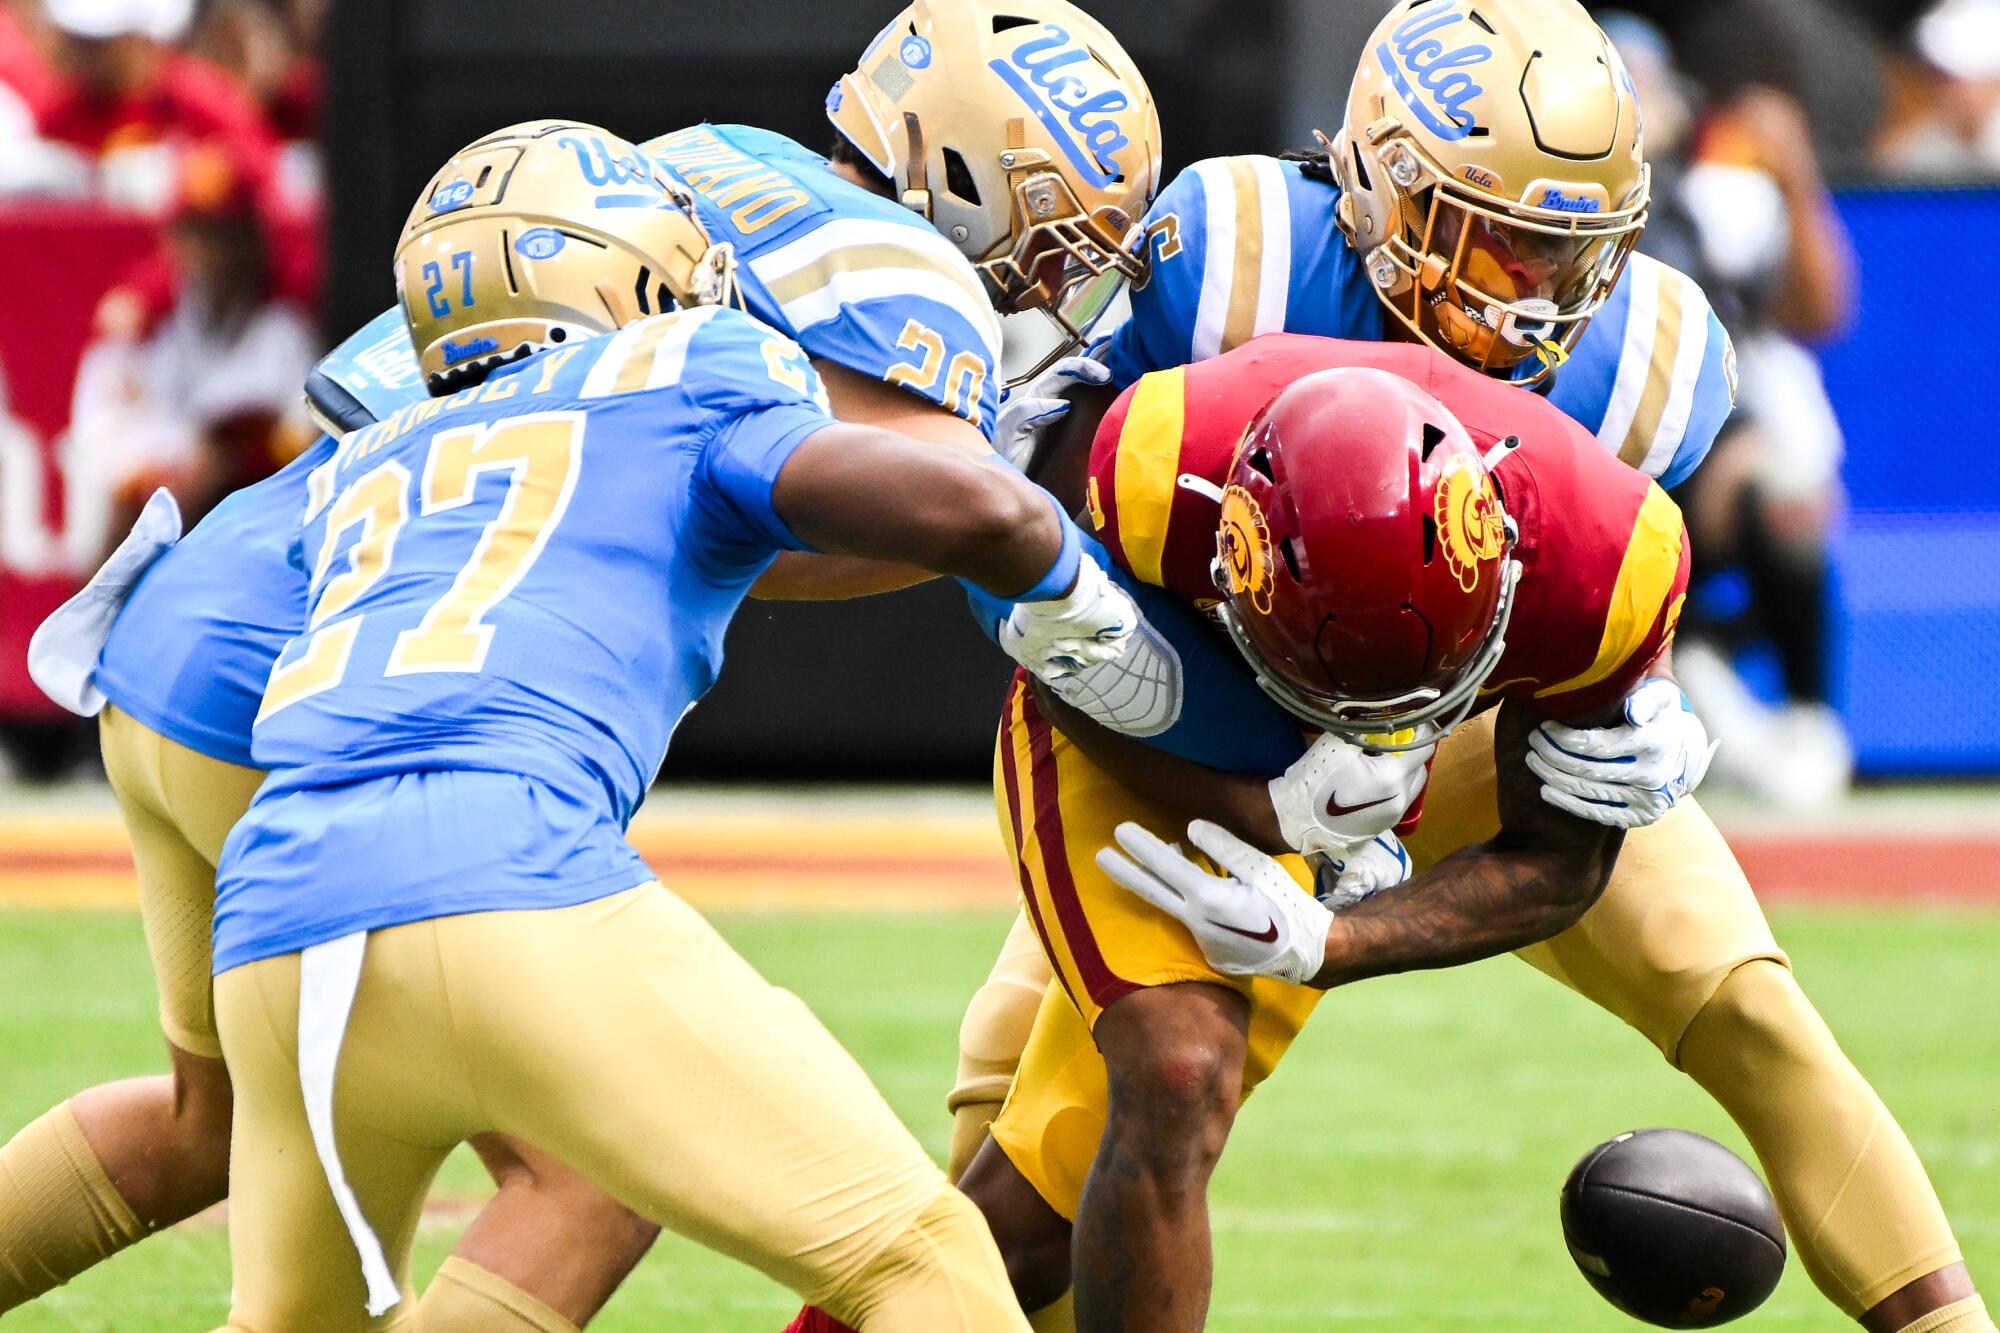 USC's Brenden Rice fumbles the ball while under pressure from UCLA's John Humphrey, Kain Medrano and Kamari Ramsey